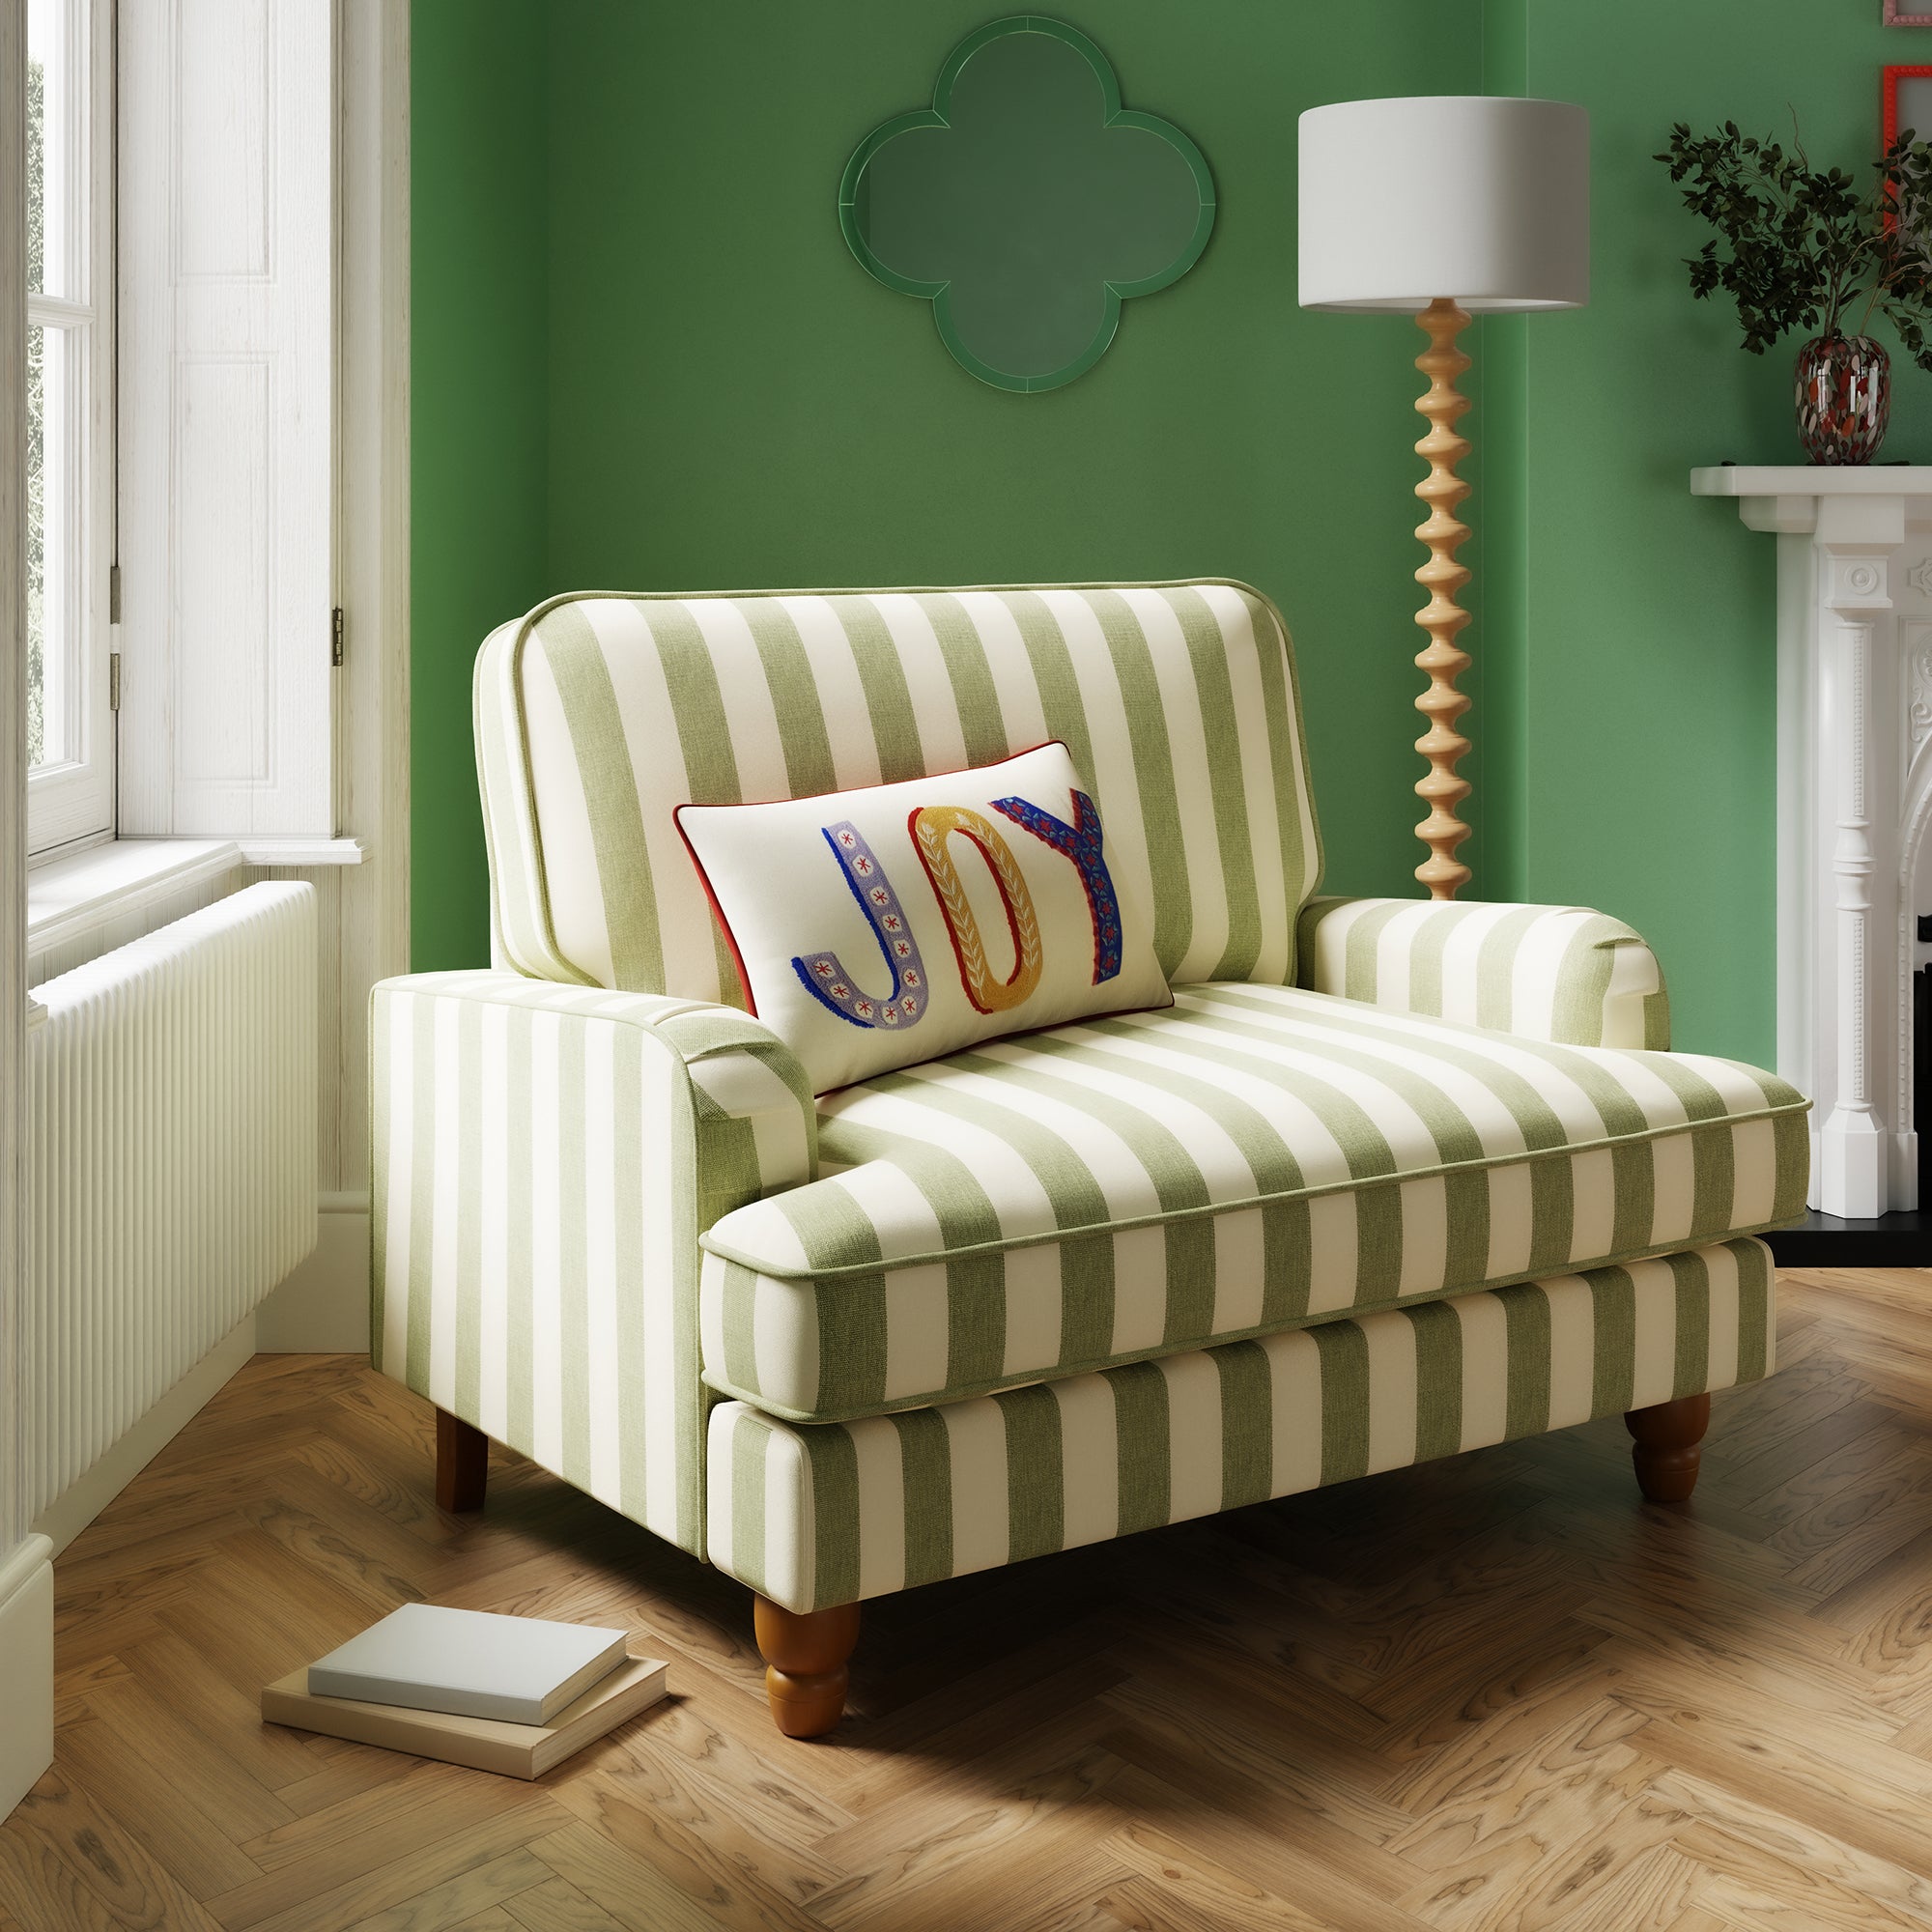 Beatrice Woven Striped Snuggle Chair Olive